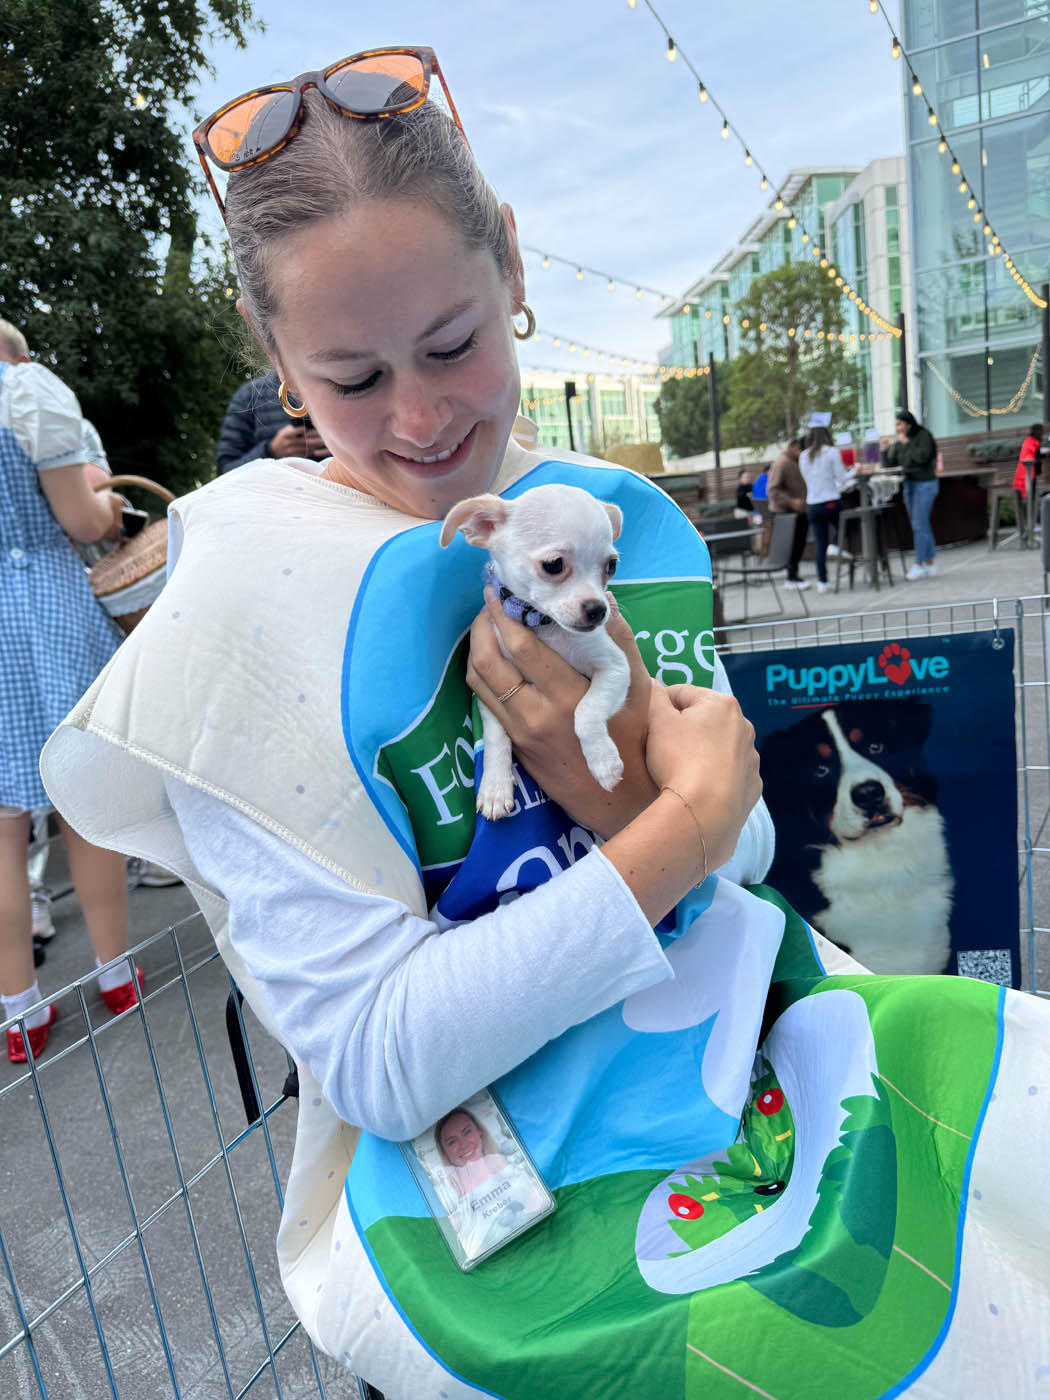 Puppy Love brings puppies and joy to google - girl in halloween costume holding a little pup.